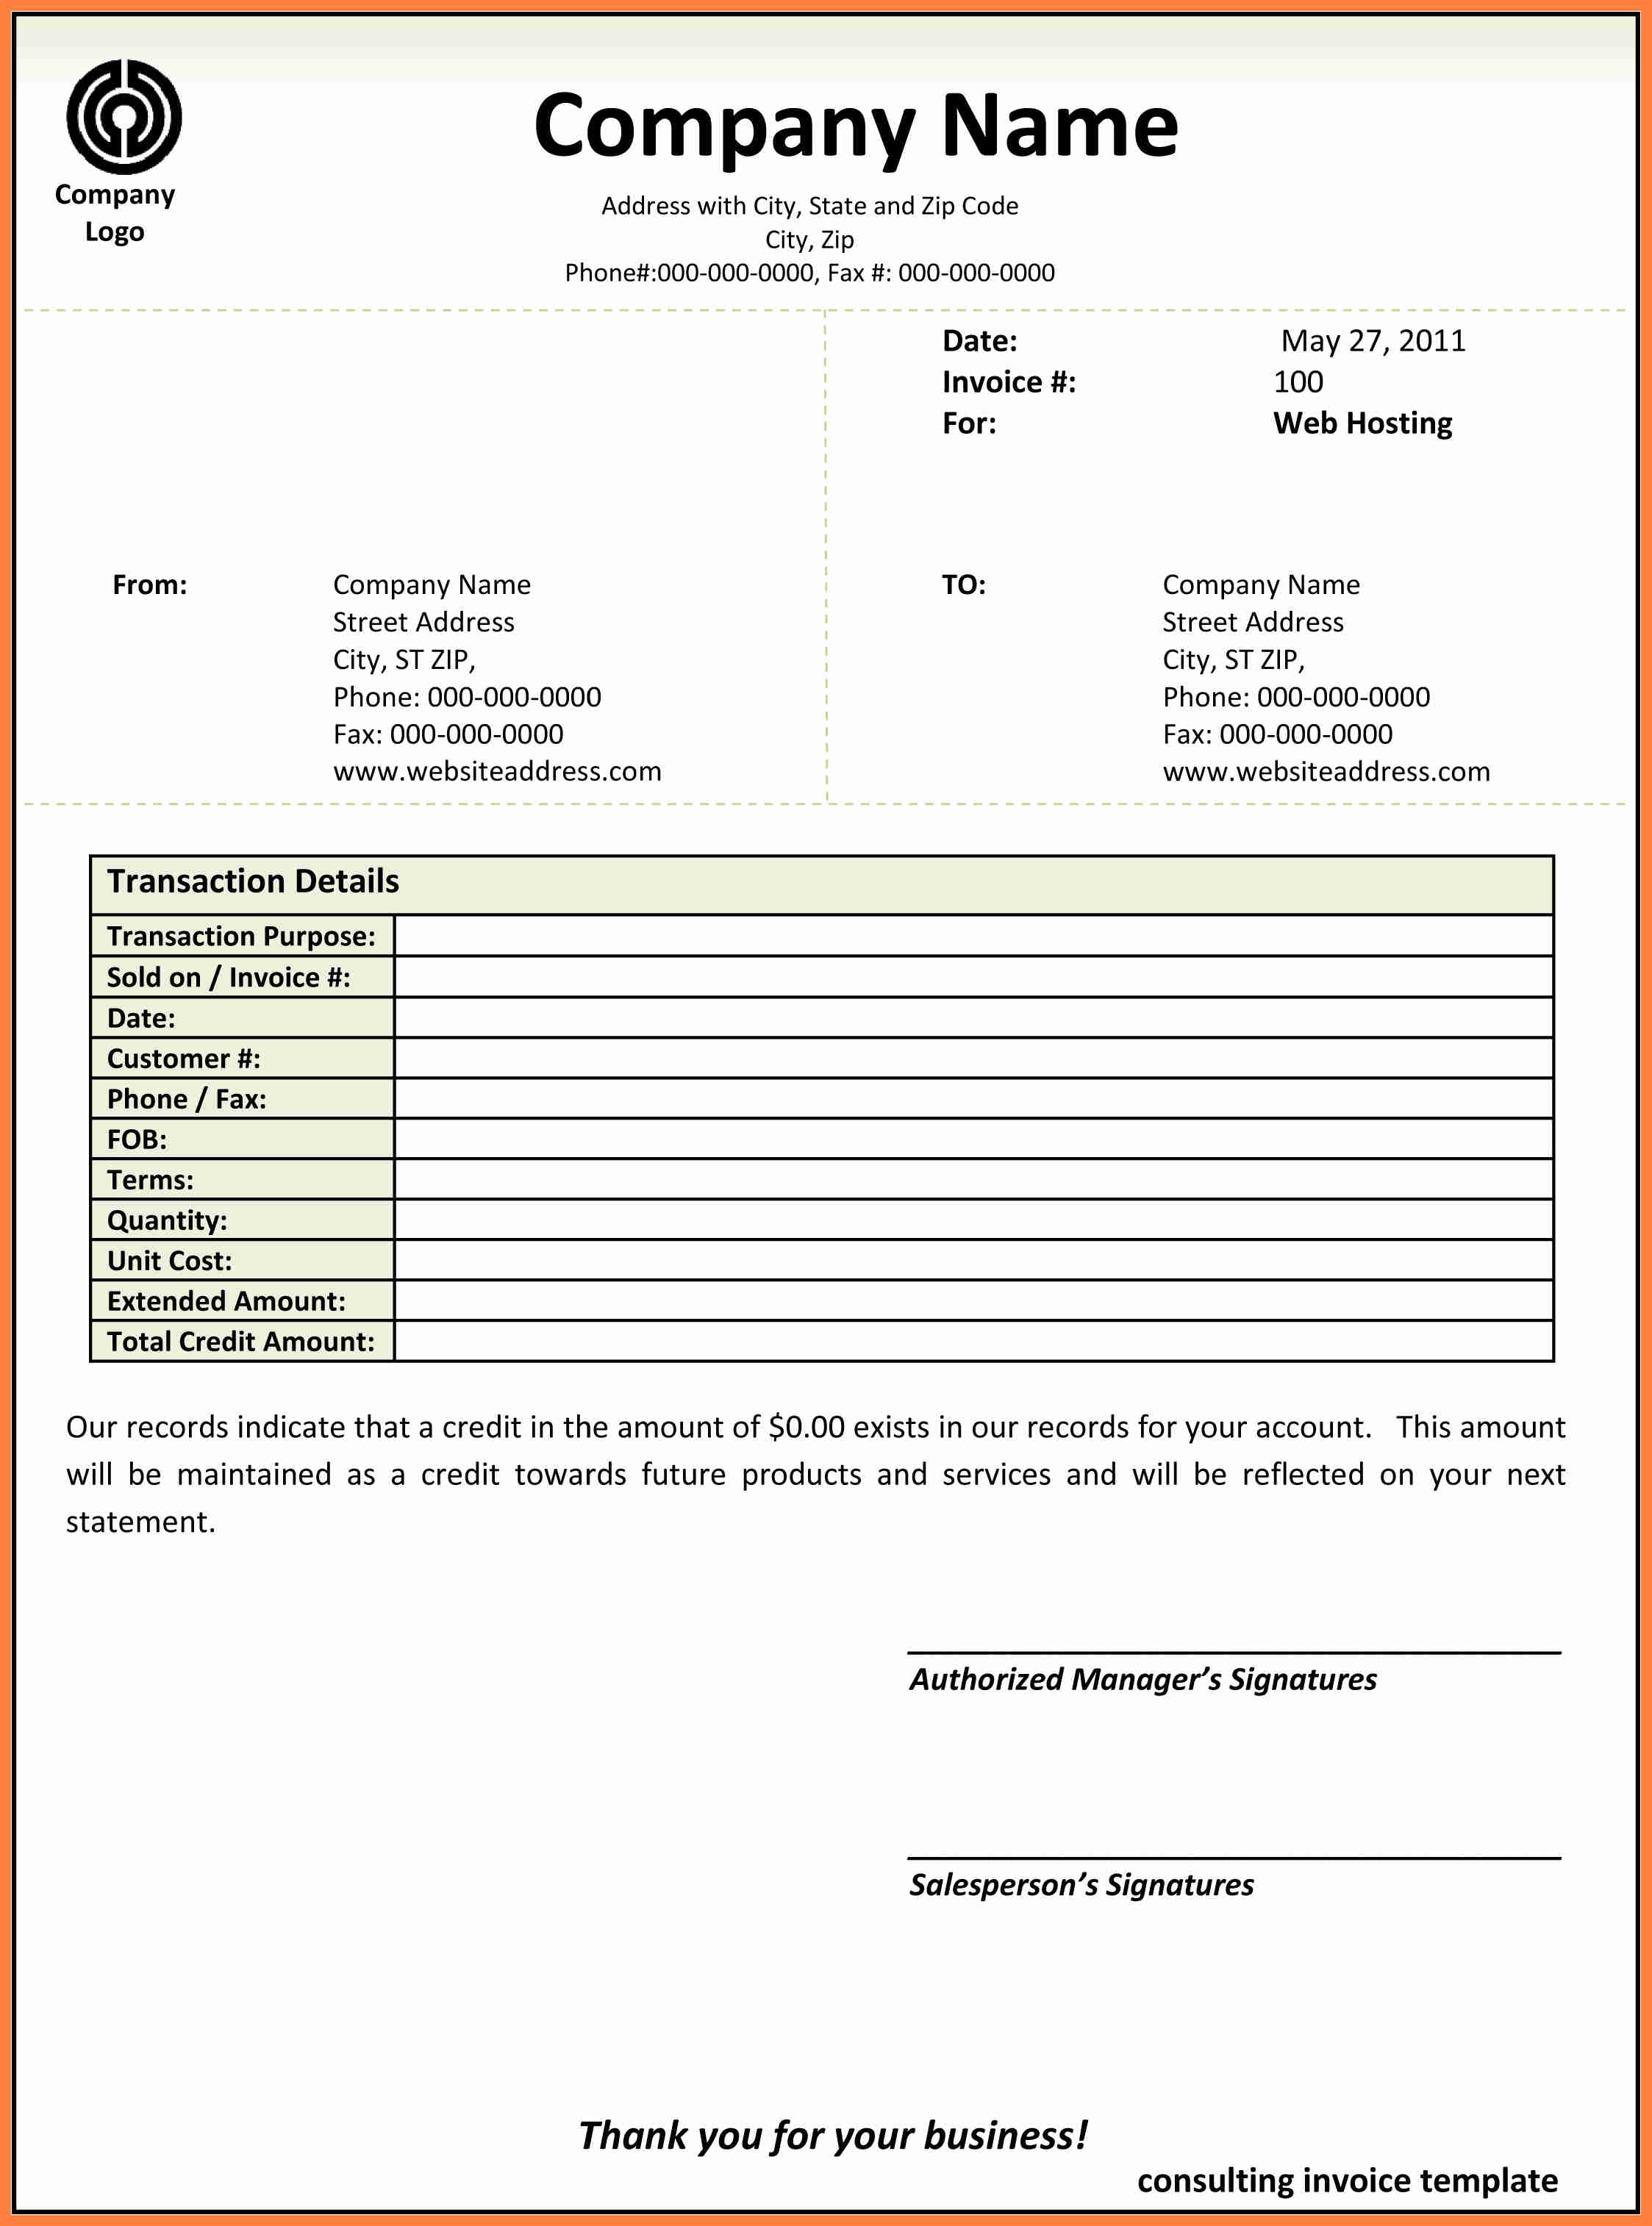 66 Free Consulting Invoice Format In Excel In Word For Consulting Invoice Format In Excel Cards Design Templates